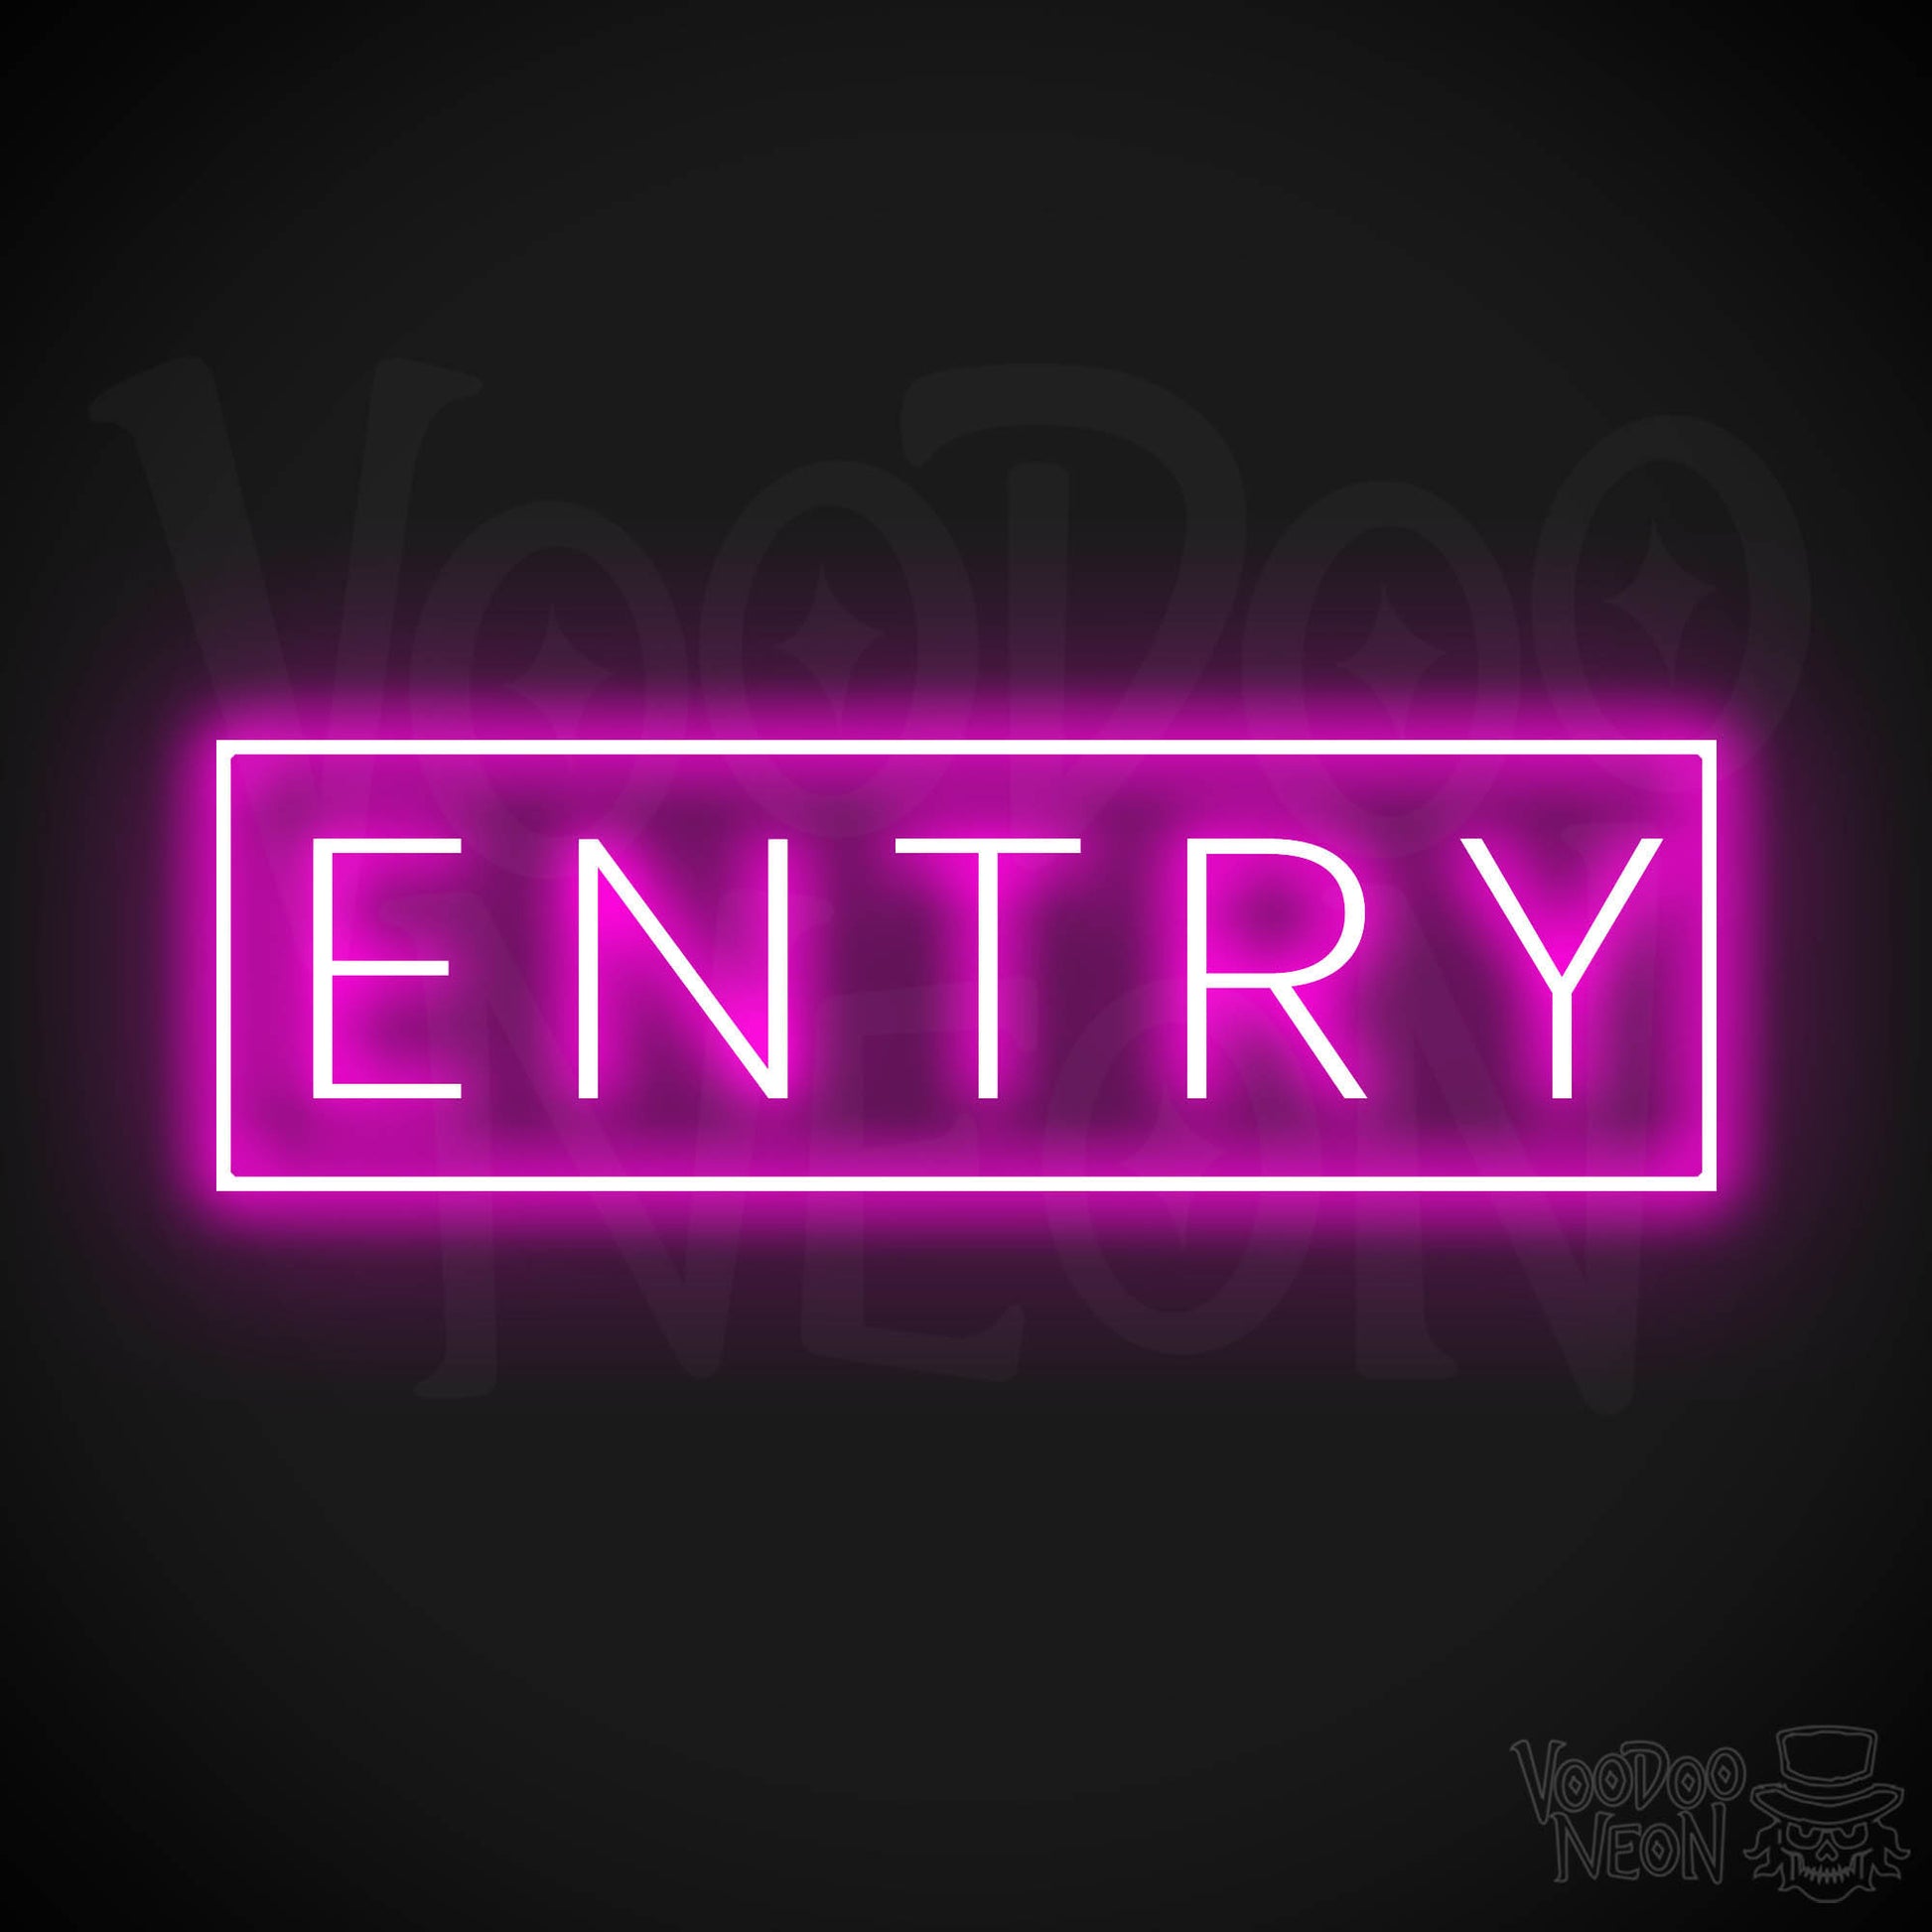 Entry LED Neon - Pink